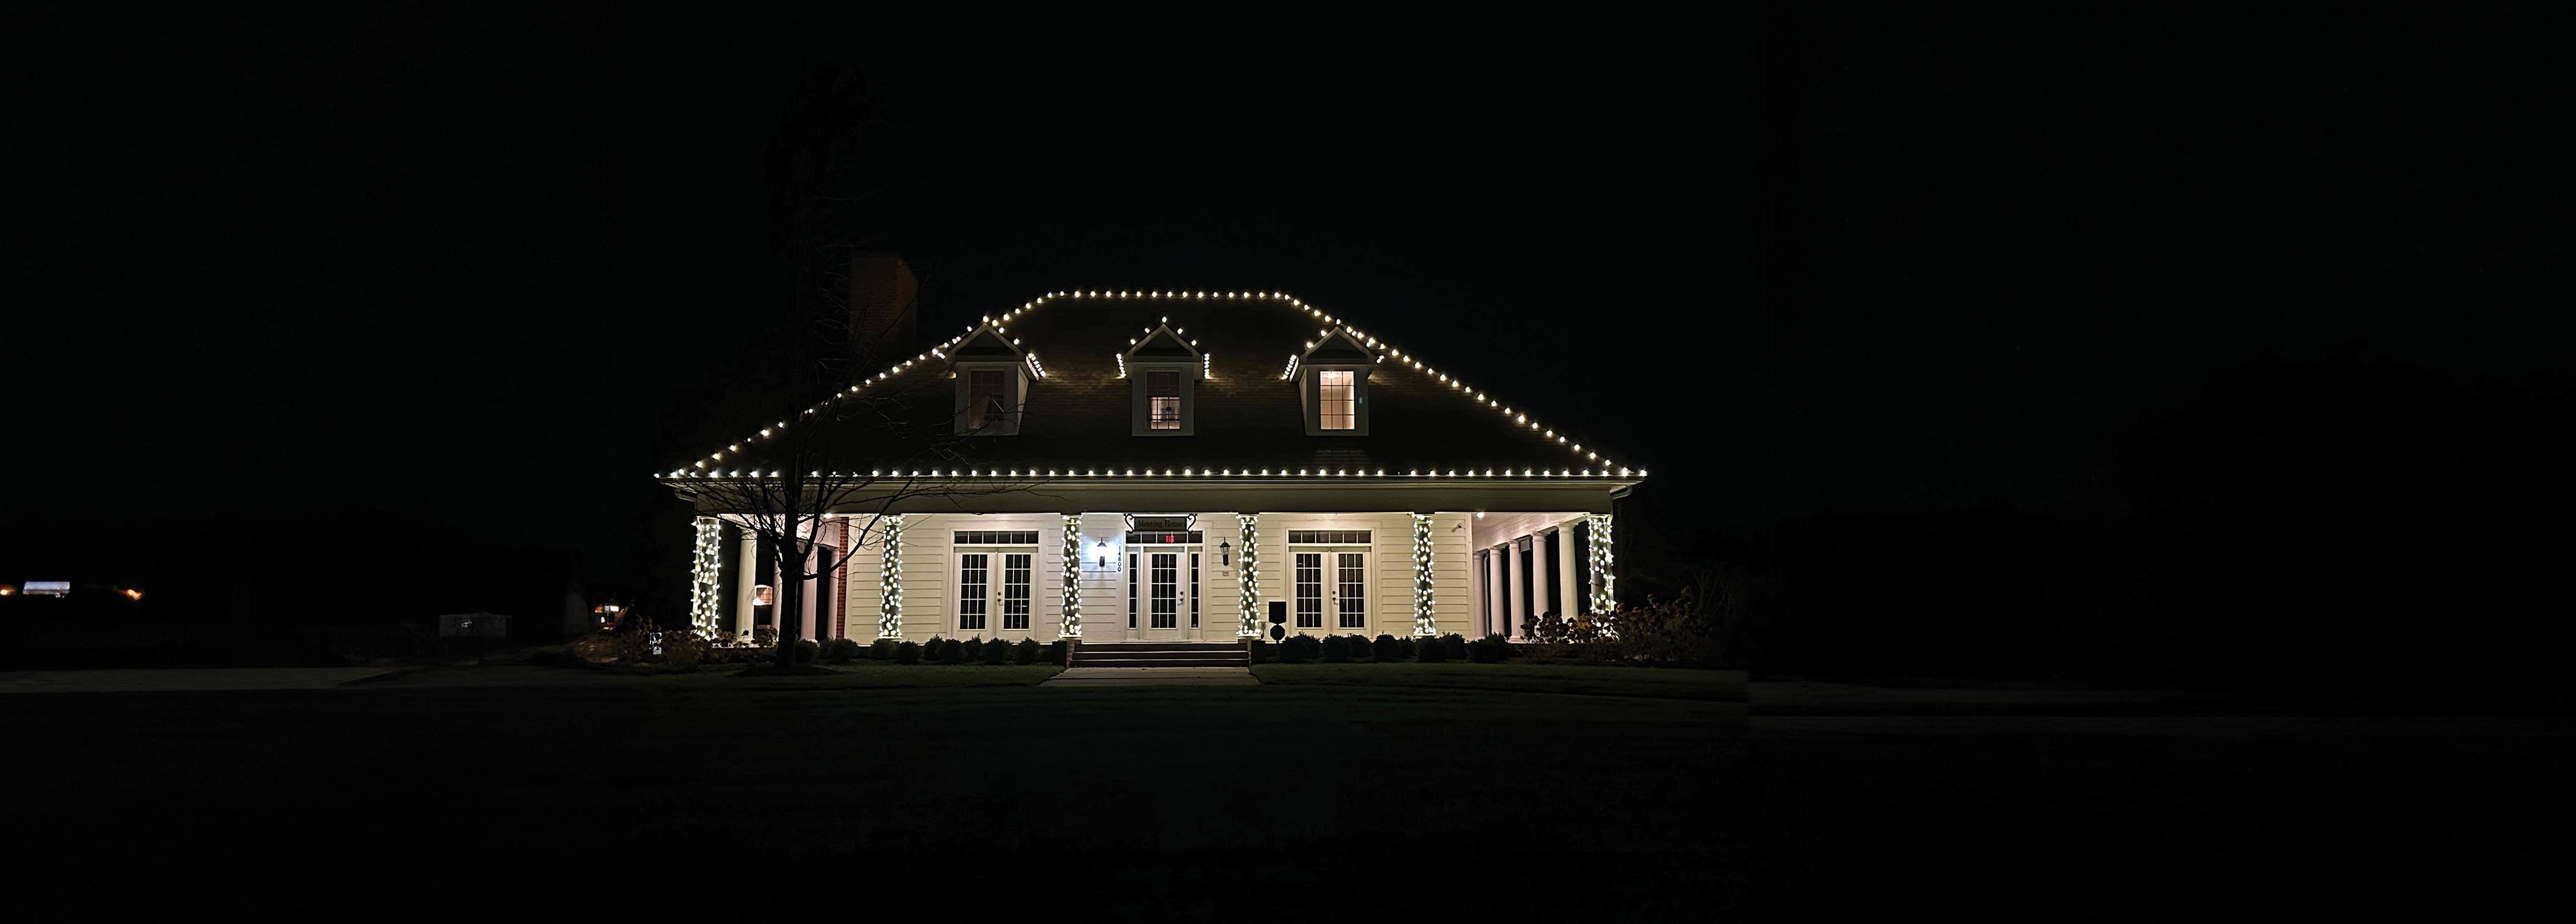 Green's Lawncare & Property Services Finished Christmas Lights